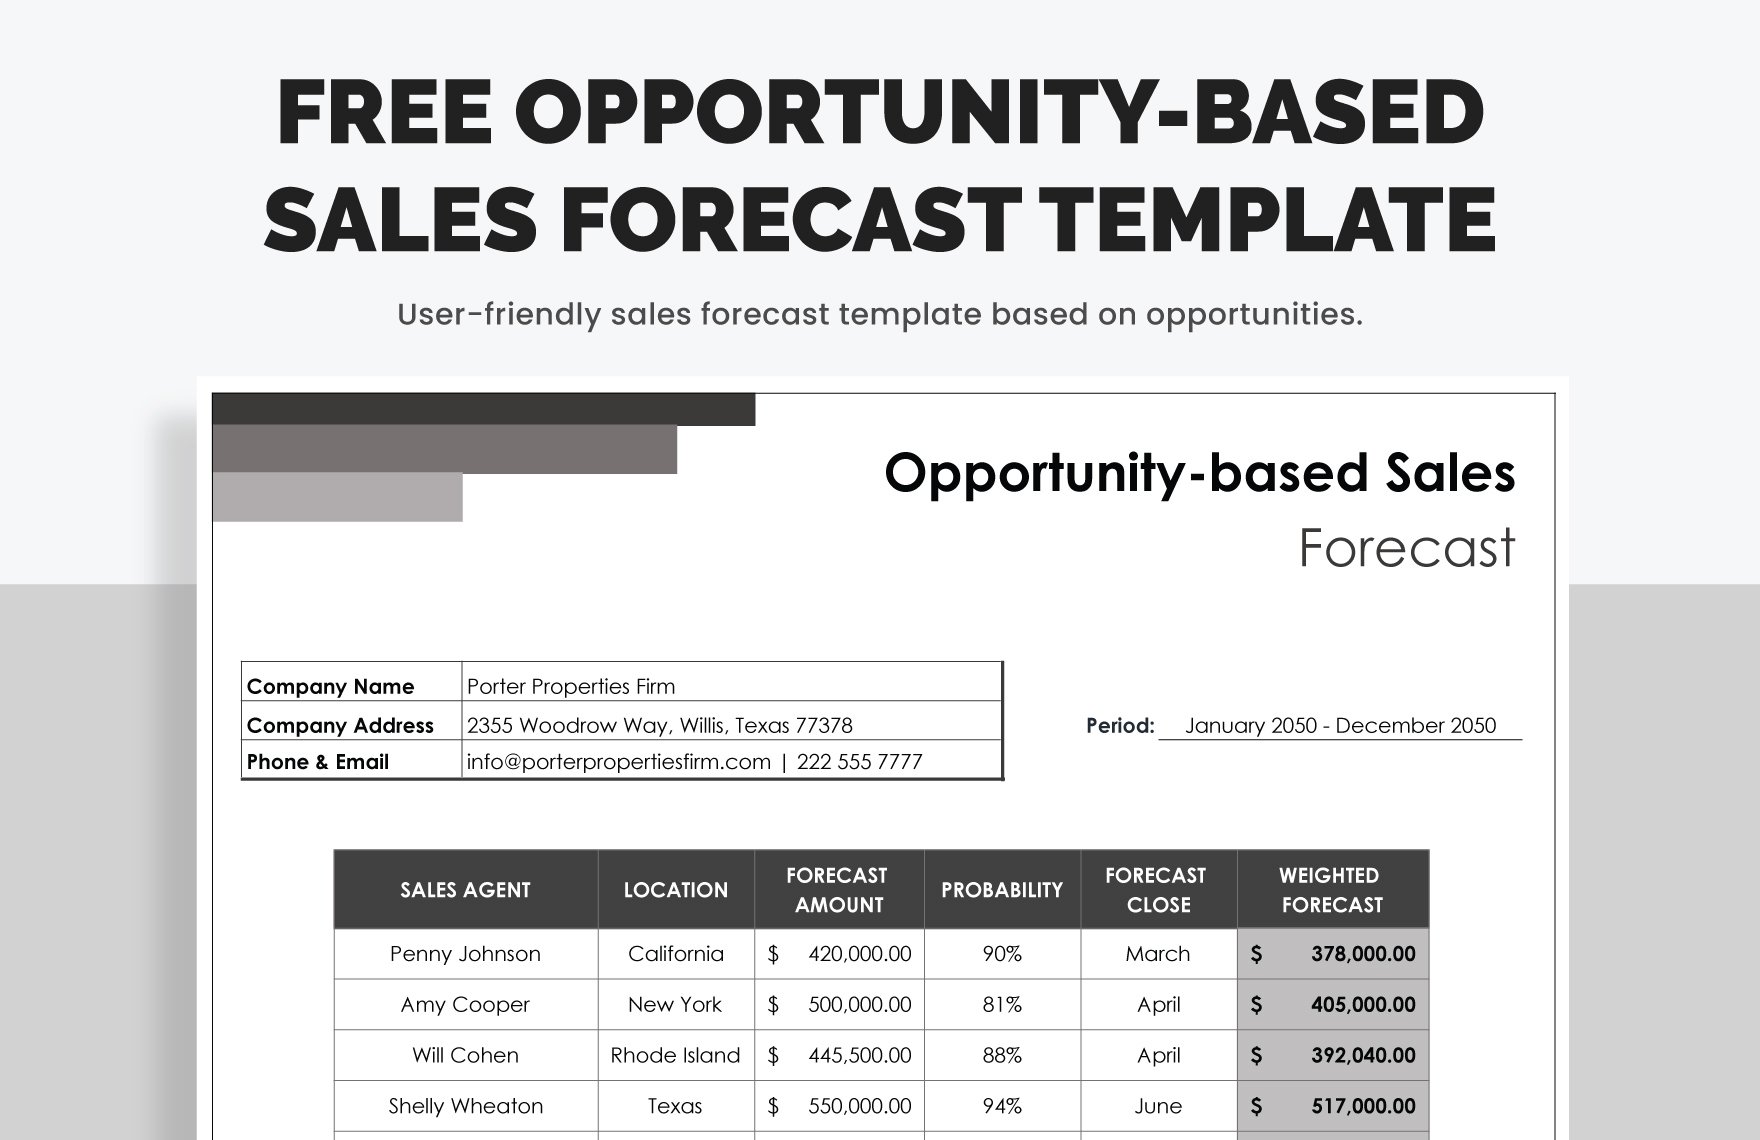 Opportunity-based Sales Forecast Template